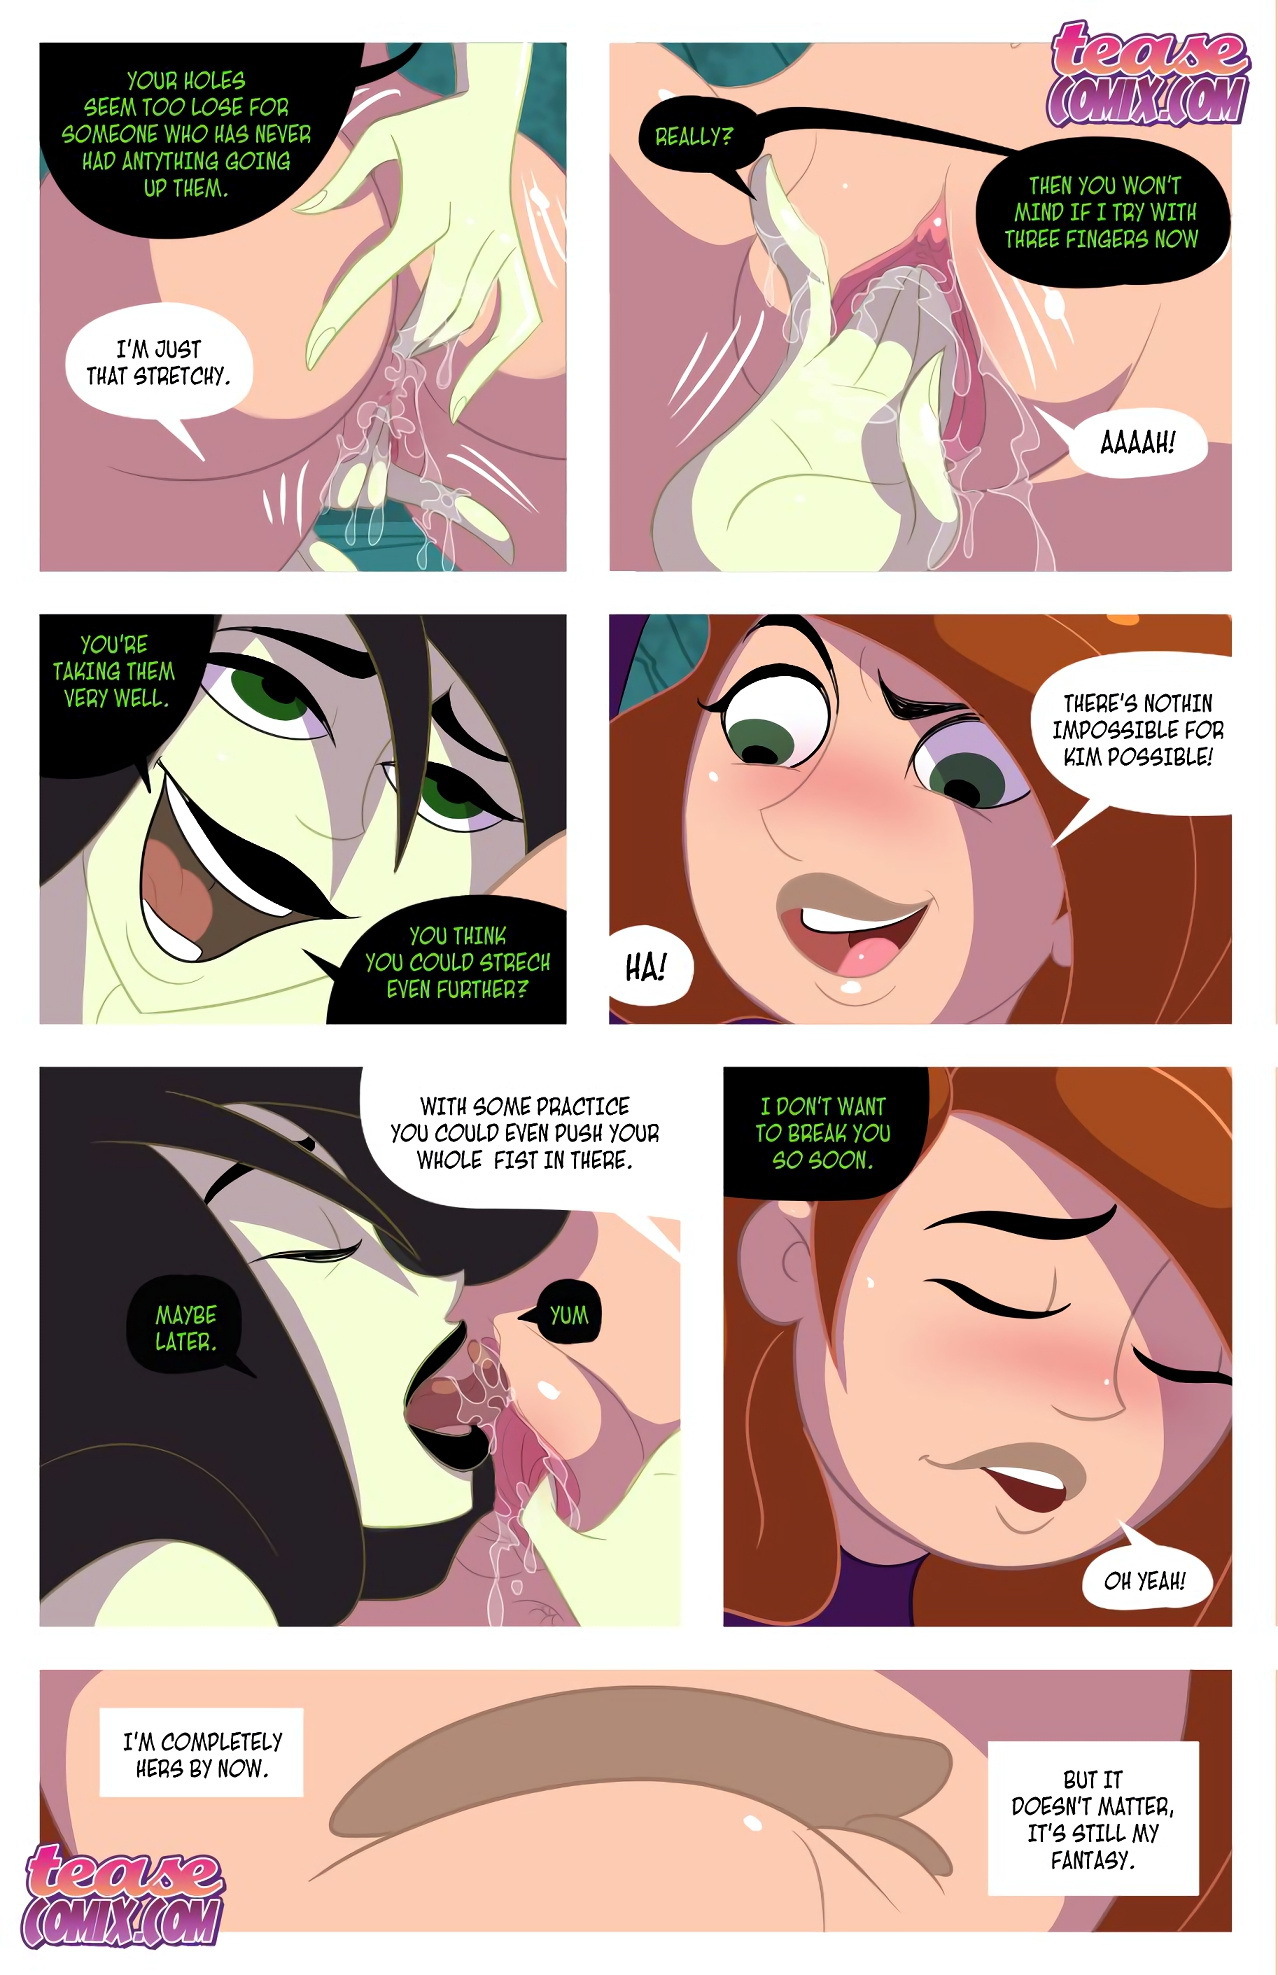 Kinky Possible - A Villain's Bitch Remastered - Page 16